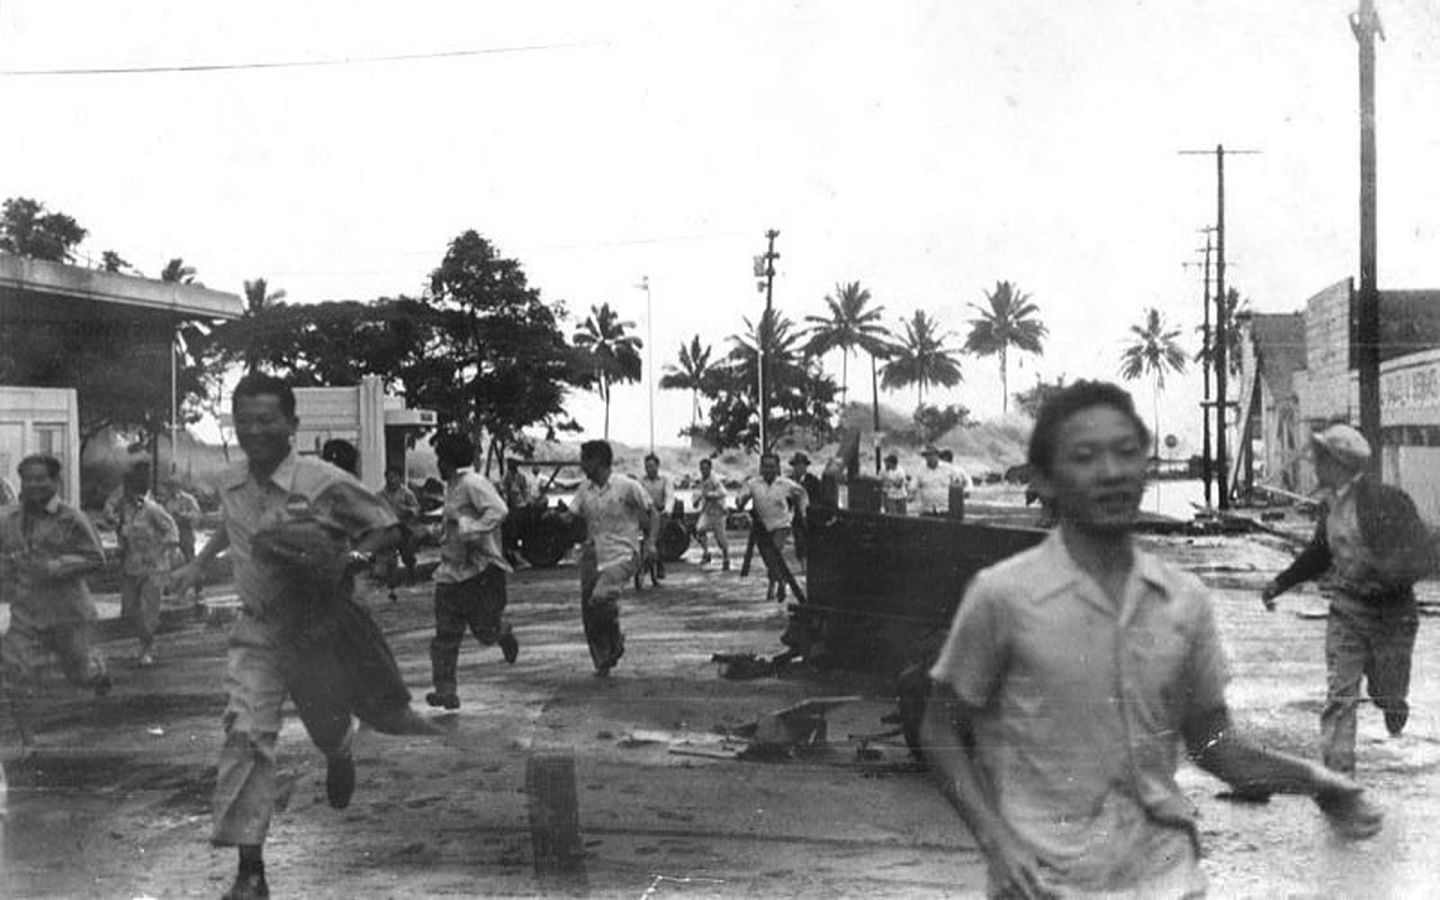 People run from an approaching tsunami in Hilo, Hawaii on April 1, 1946. The same tsunami hit Central California, and was generated by a fault rupture near the Aleutian Islands.